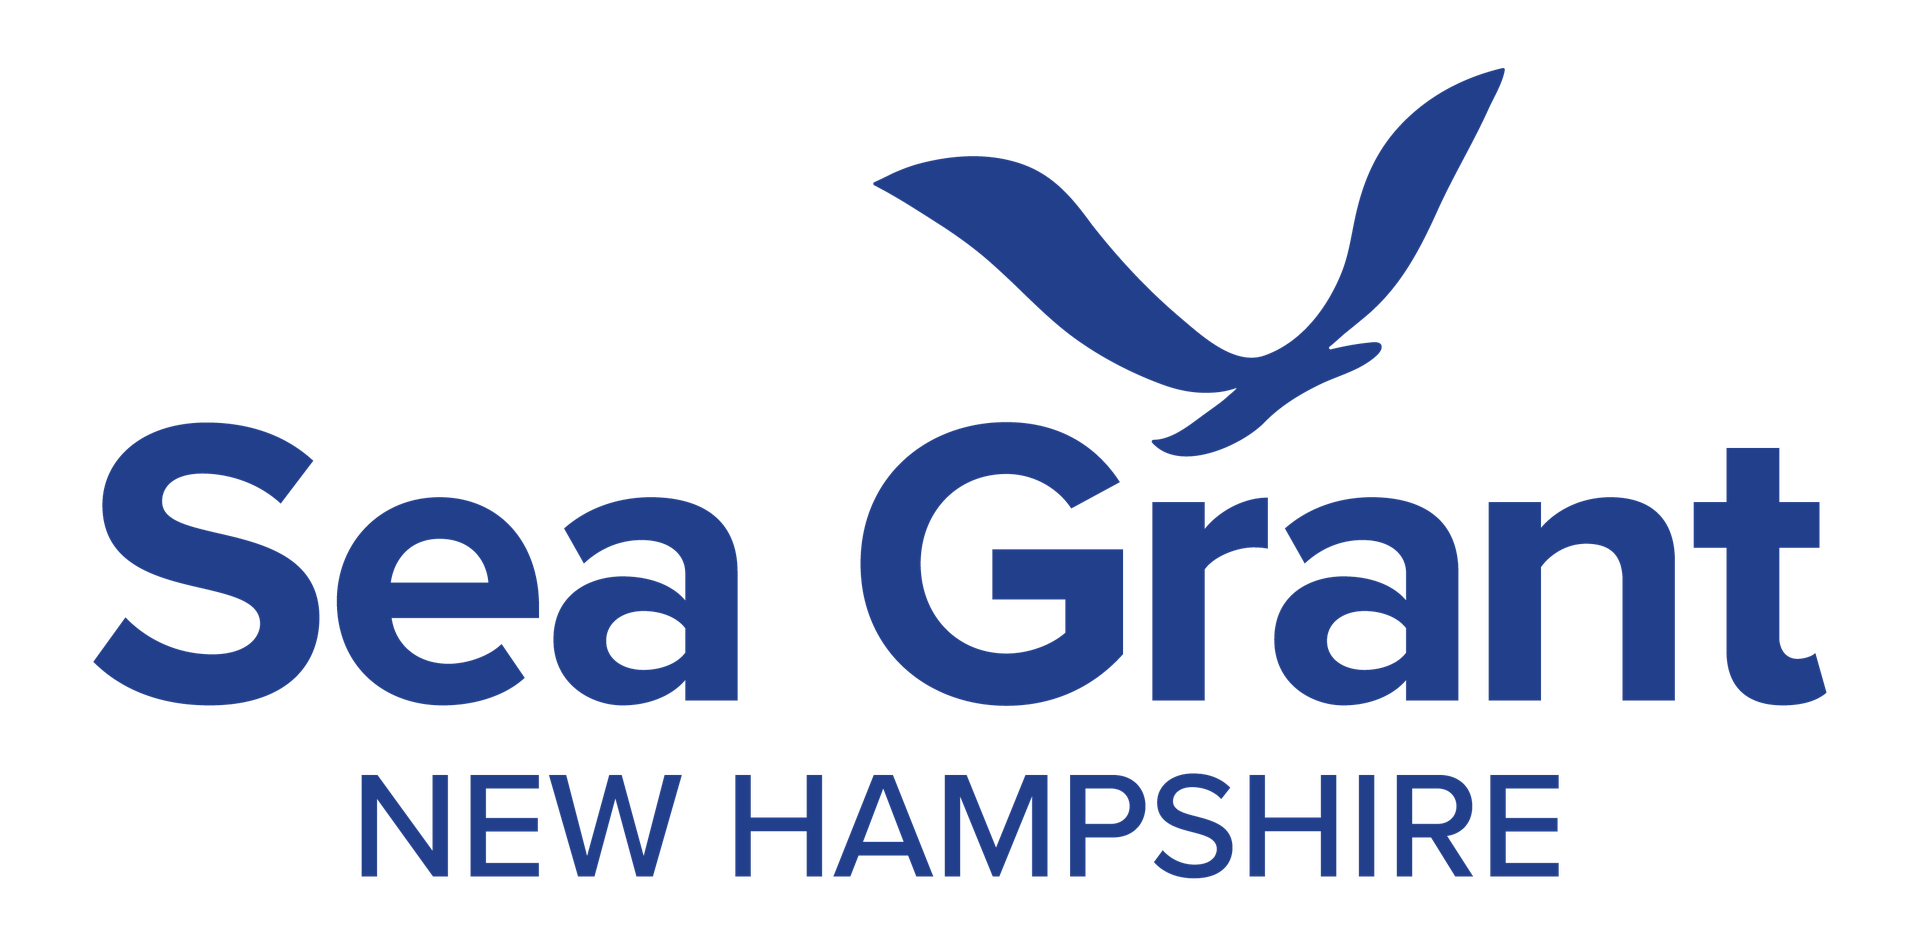 New Hampshire Sea Grant logo with silhouette of gull